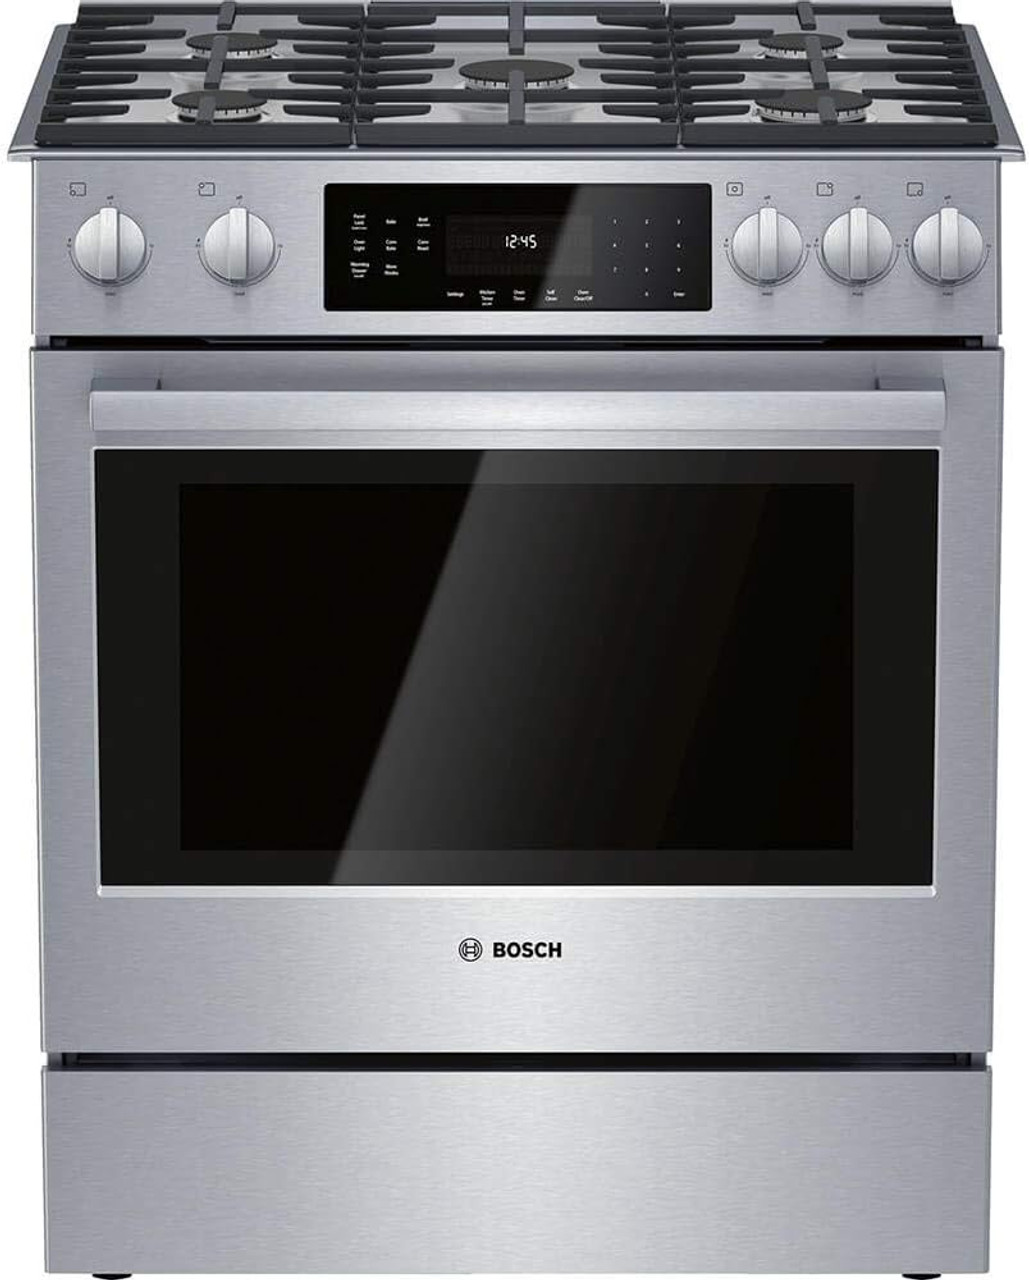 Bosch HGI8056UC 30" 800 Series Gas Range with 5 Sealed Burners; 4.8 cu. ft. Oven Capacity